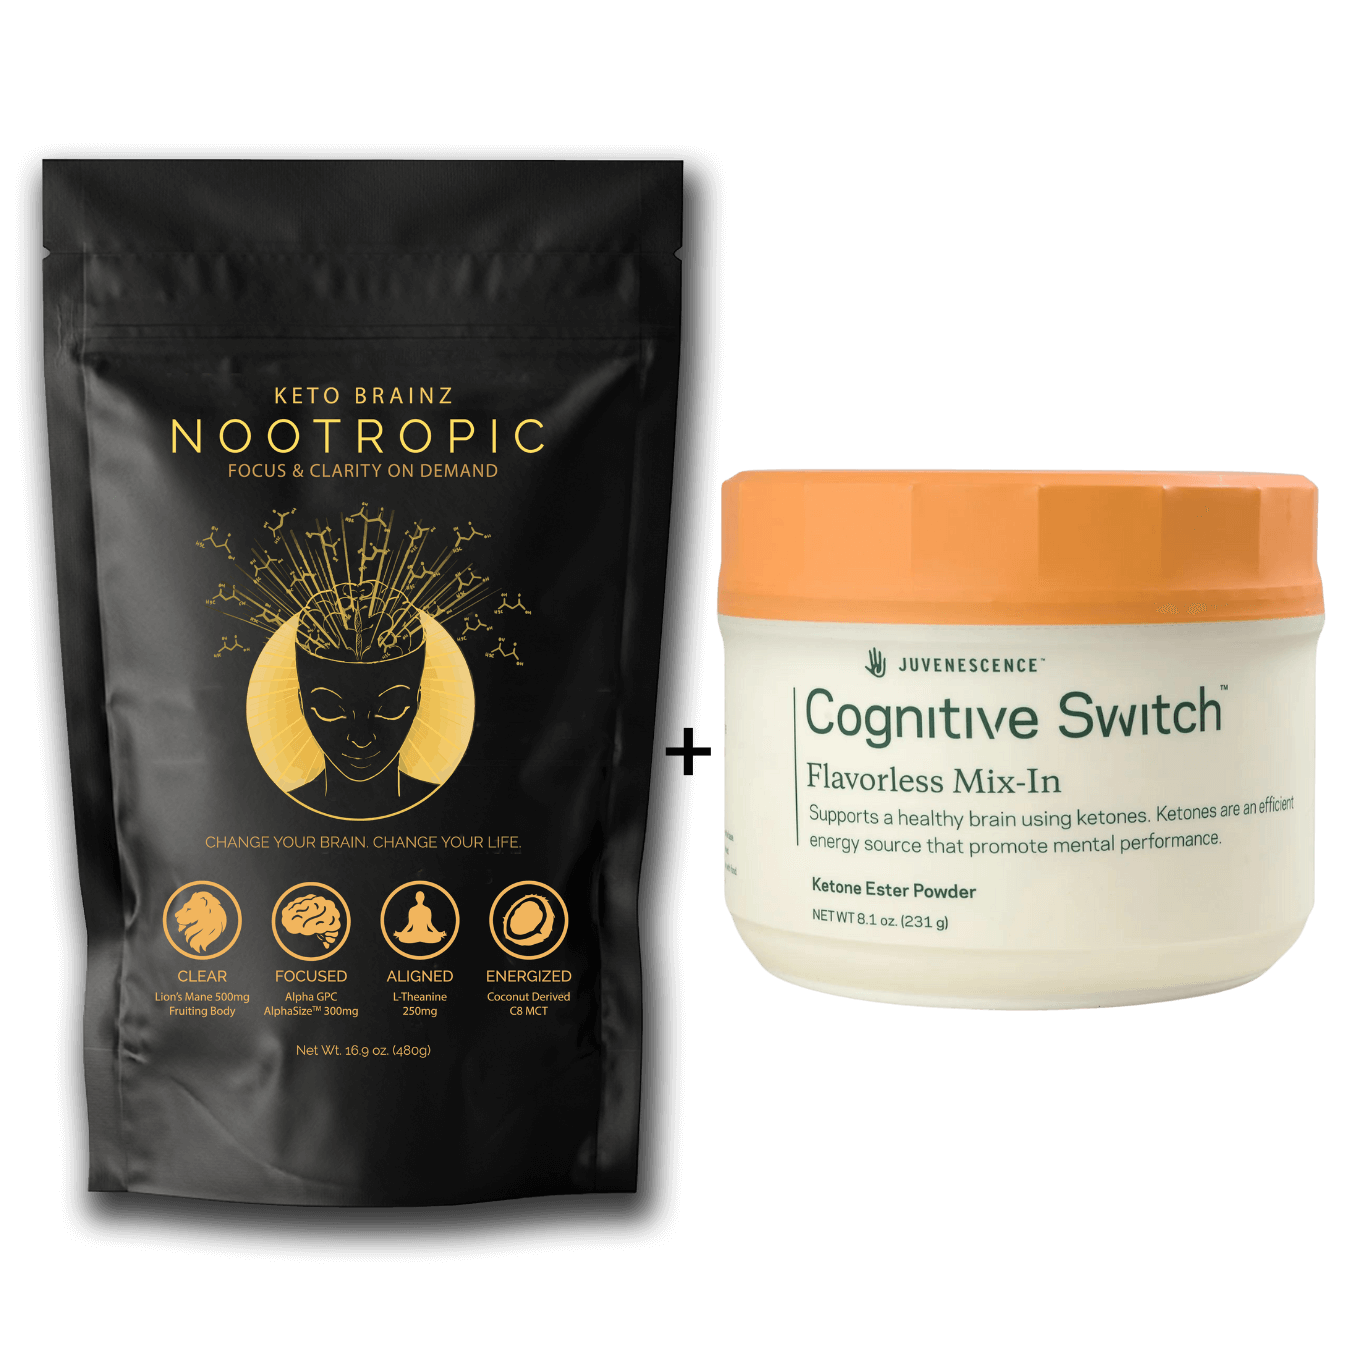 product image of keto brainz nootropic creamer and cognitive switch powdered ketone ester supplement